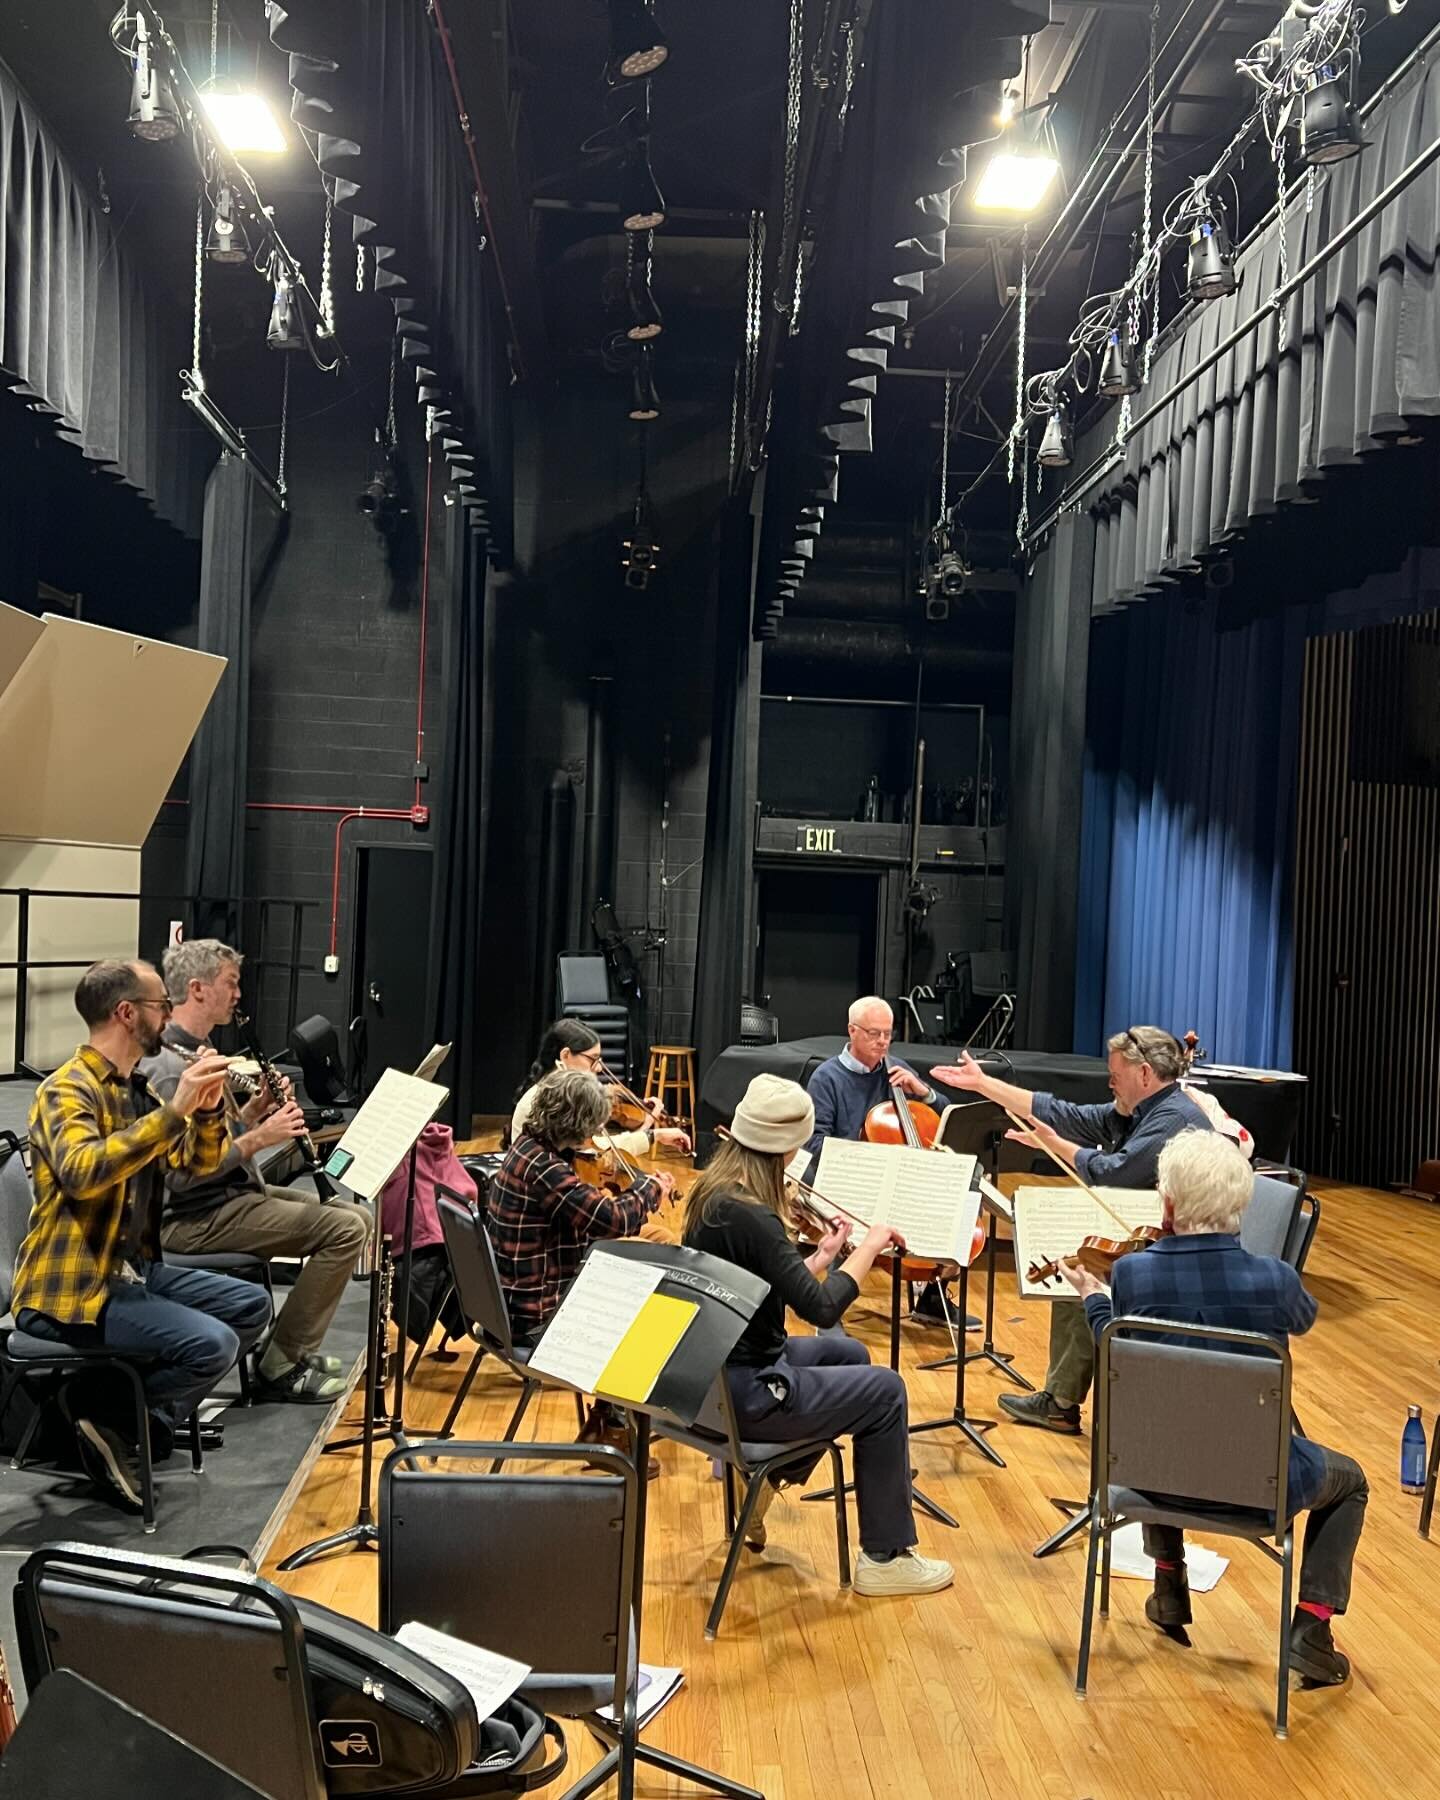 The Blue Ridge Orchestra Musique M&eacute;nage ensemble prepares for our upcoming program on March 7th at the Governor&rsquo;s Western Residence (almost sold out!!!) and 8th at Carolina Day School.  Click the link in our bio to reserve your seat toda